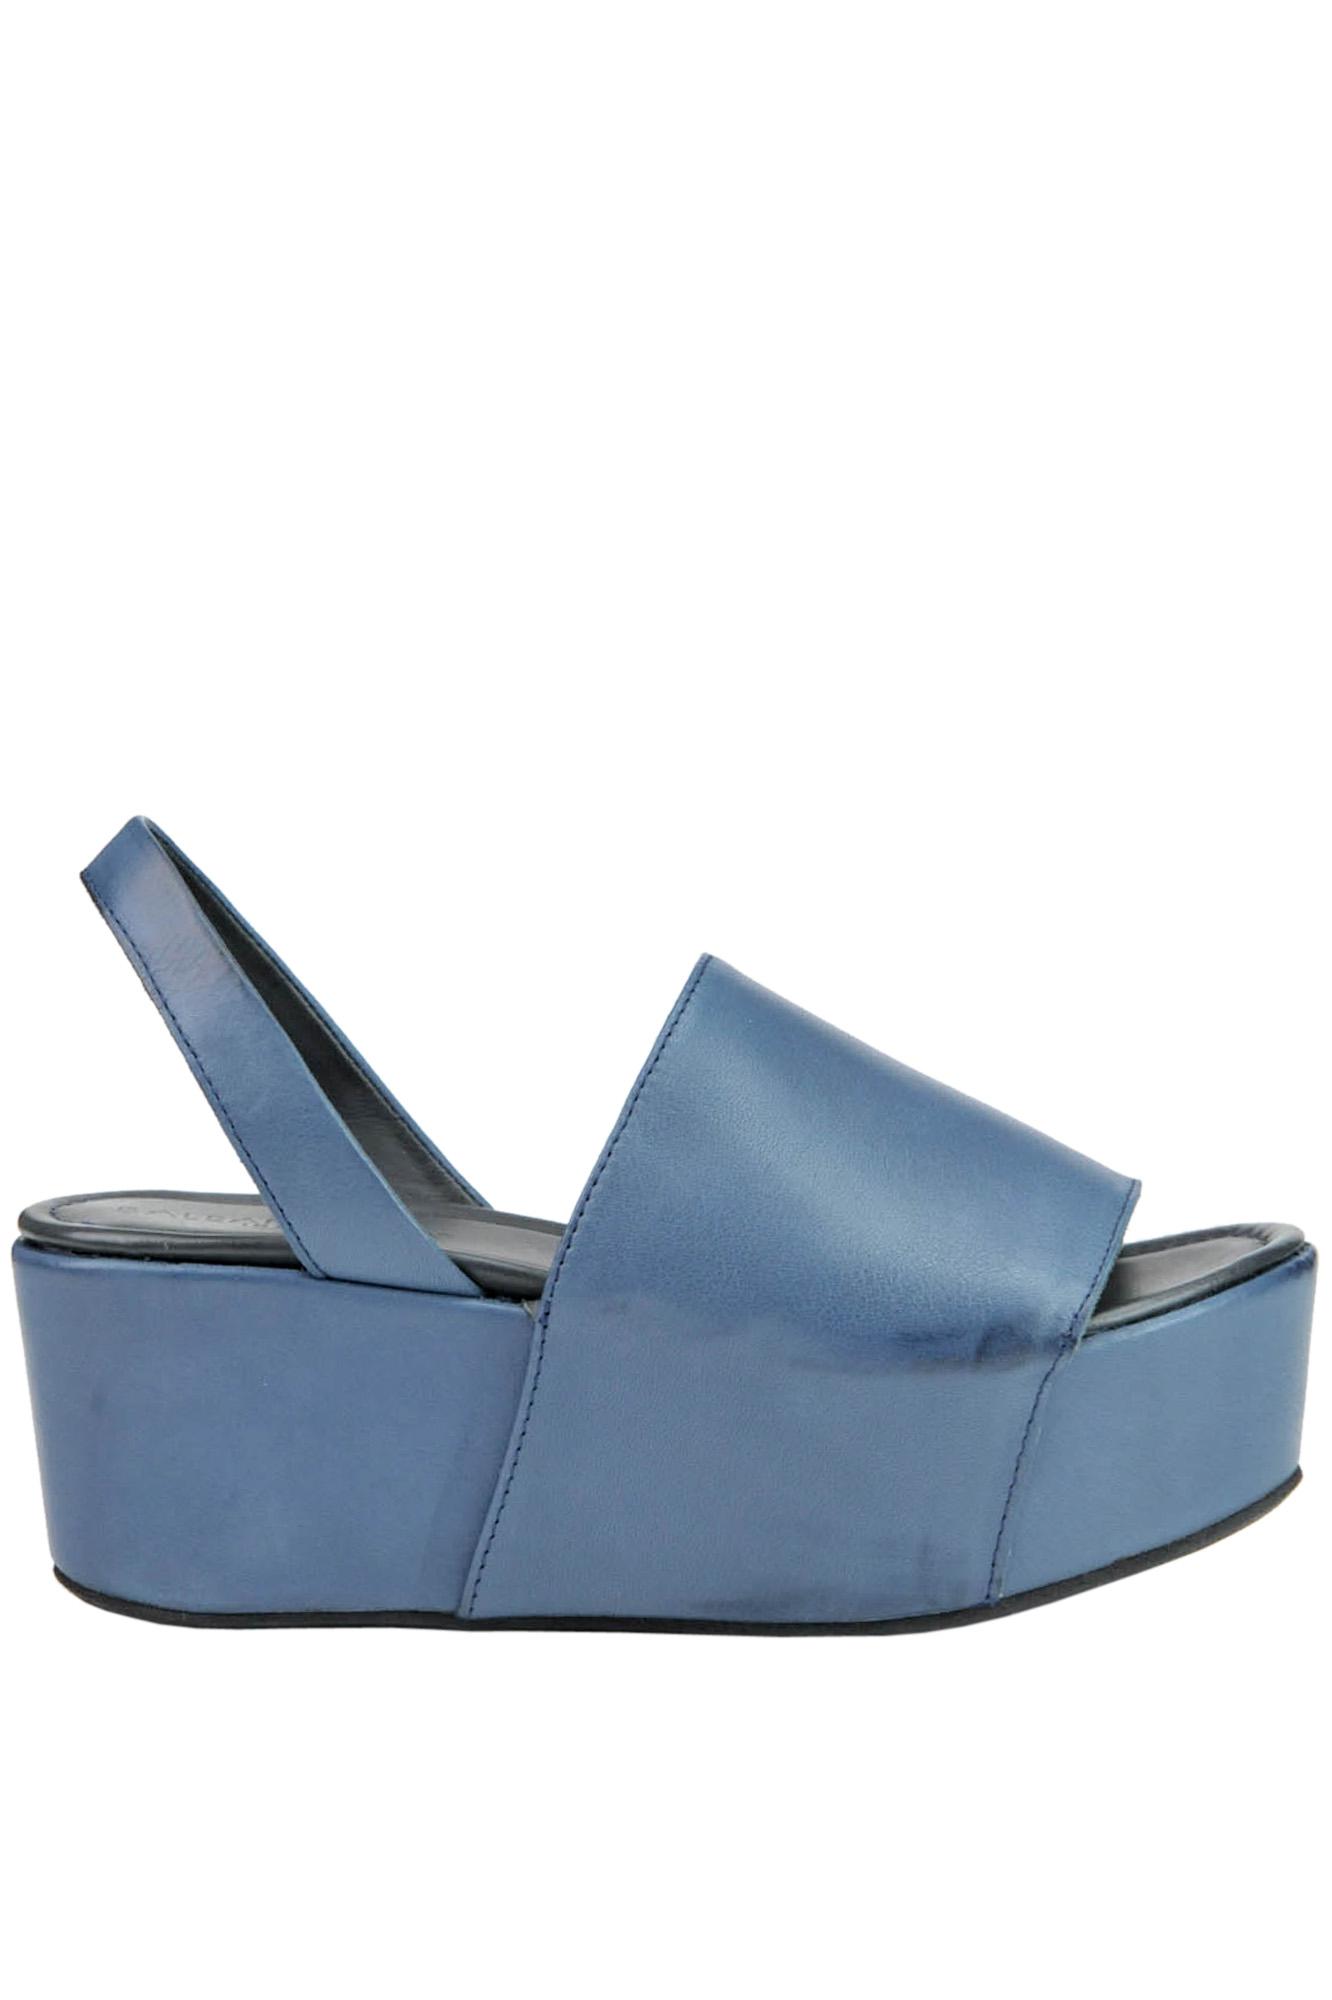 Balear Mania Leather Wedge Sandals in 